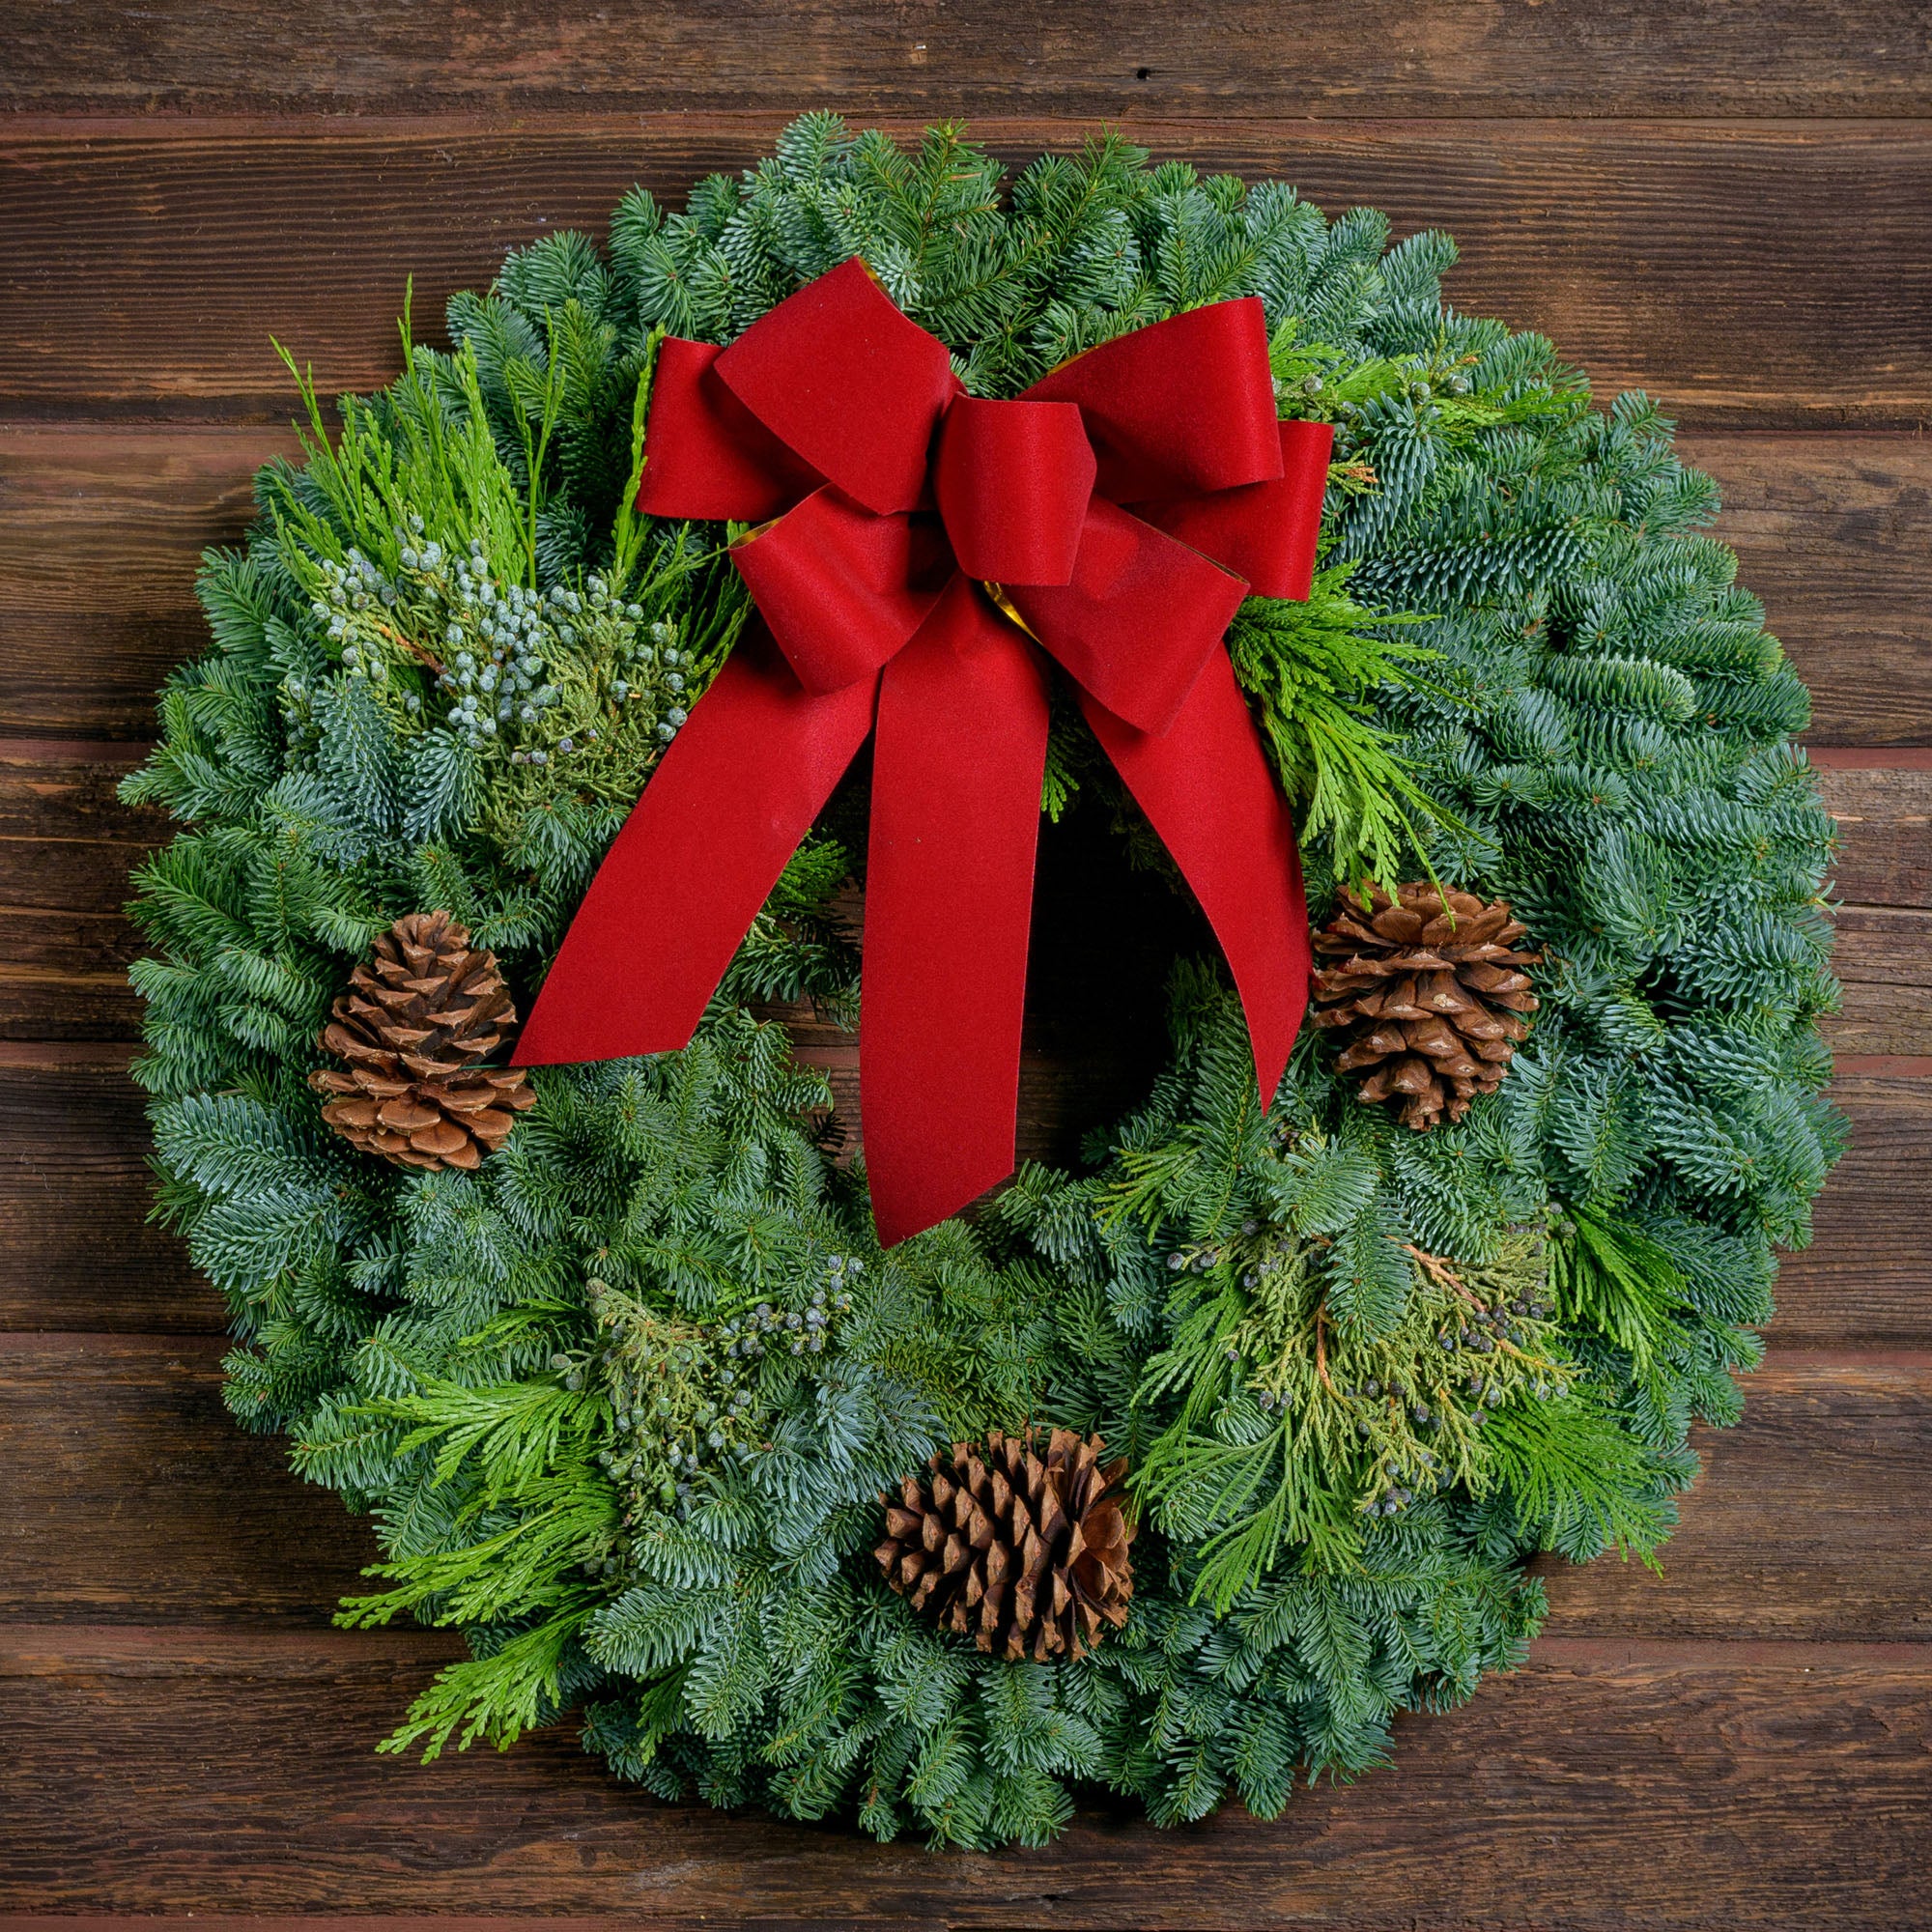 Christmas wreath made of fir, pine, cedar and juniper with pine cones and a gold-backed red velveteen bow